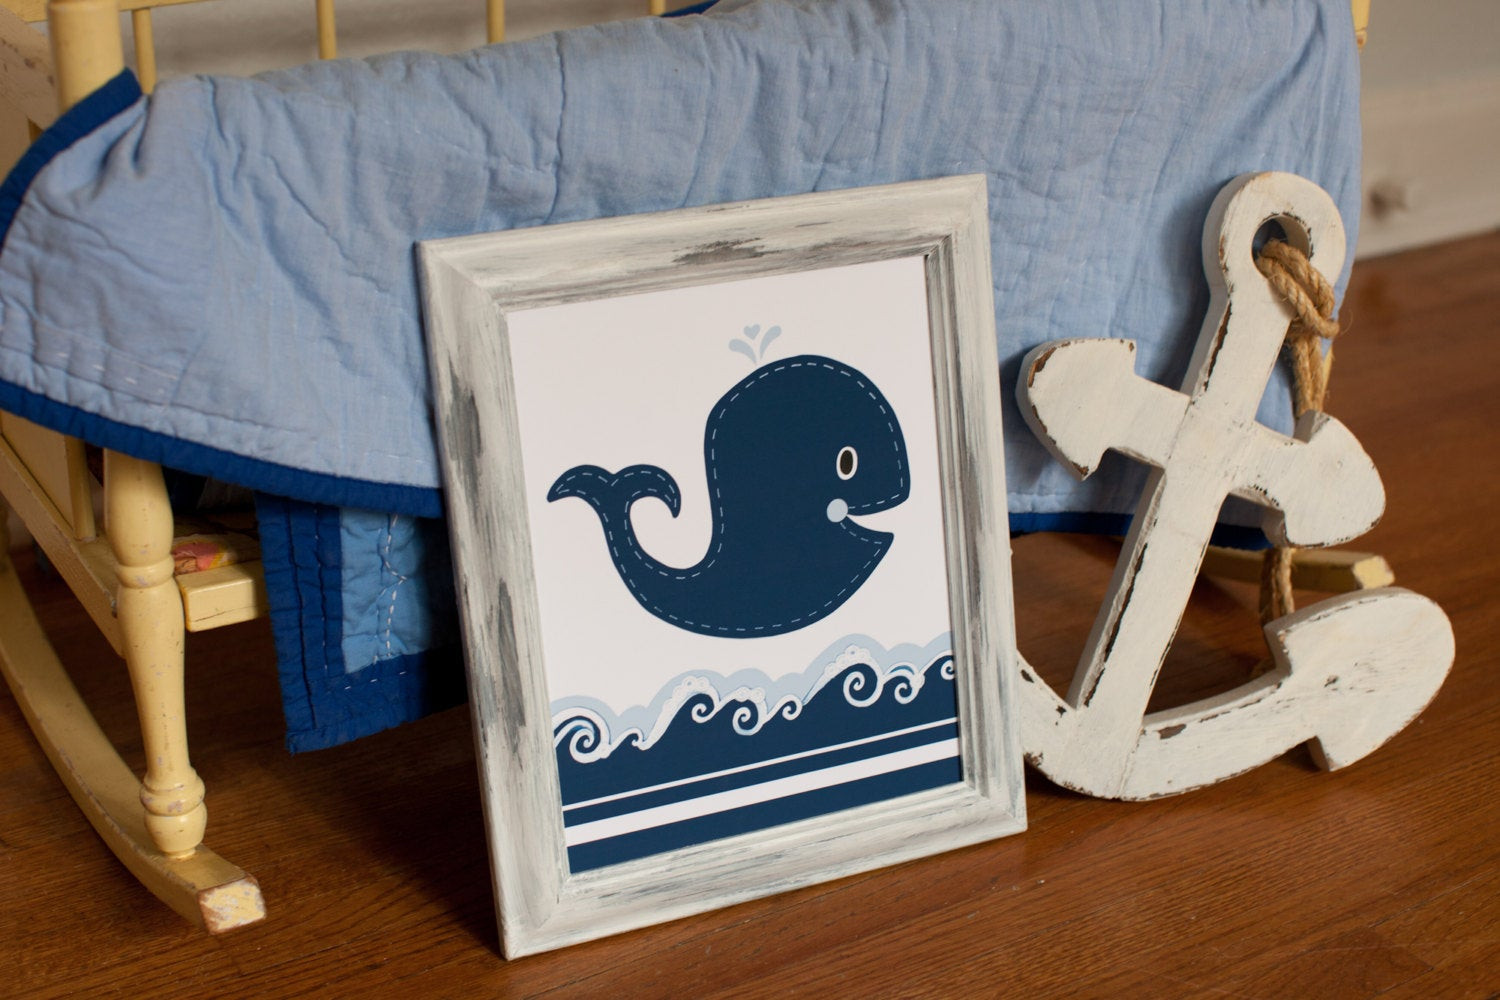 Nautical Baby Room Decorations
 Whale nursery Nautical room decor Childrens by